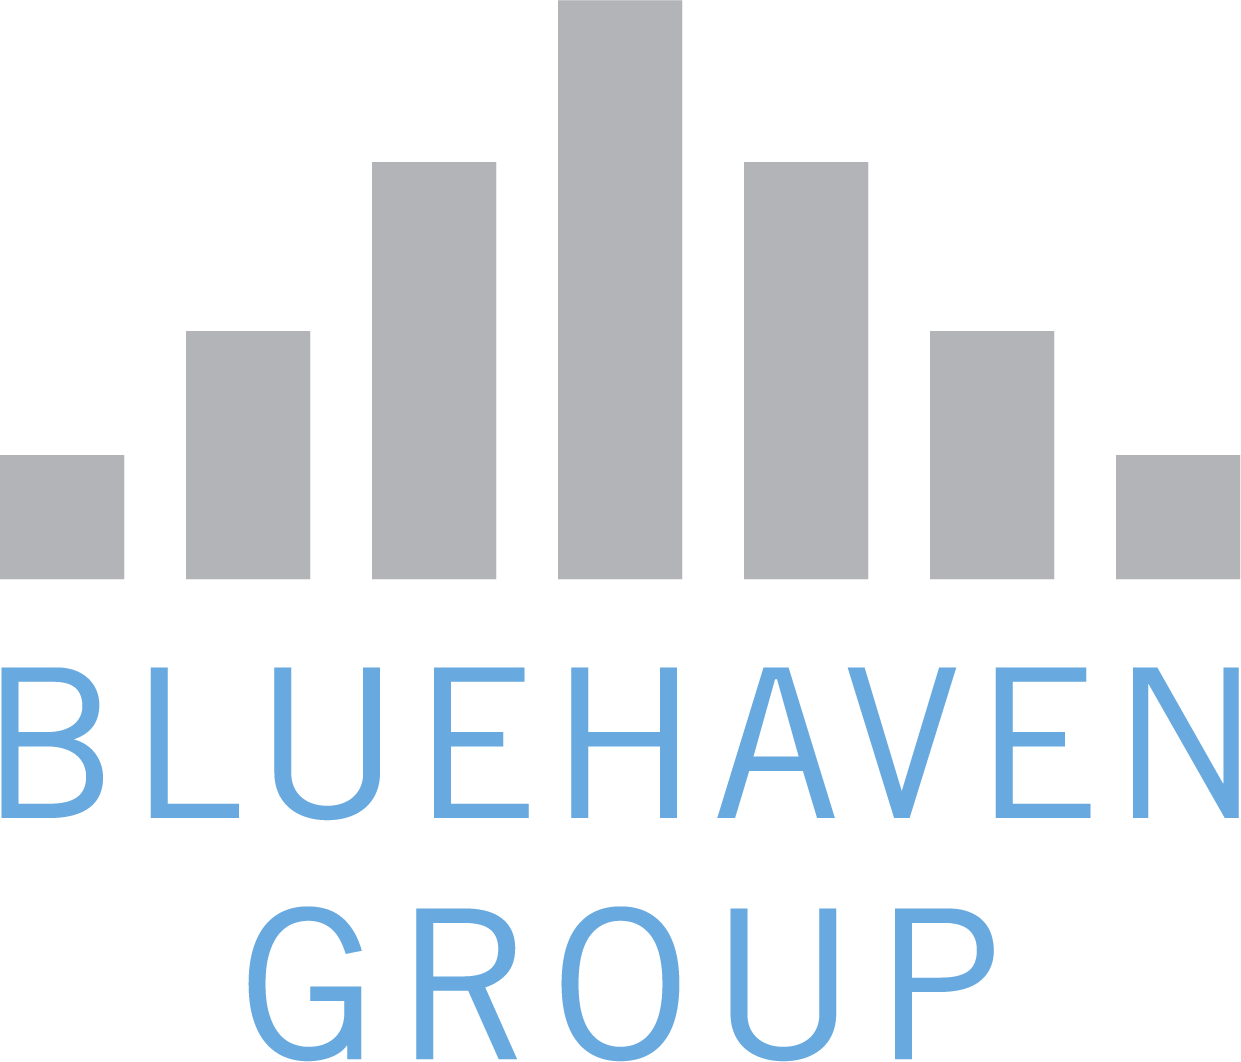 https://bluehavengroup.co.nz/wp-content/uploads/2020/03/cropped-Bluehaven-Group-Logo-2.png